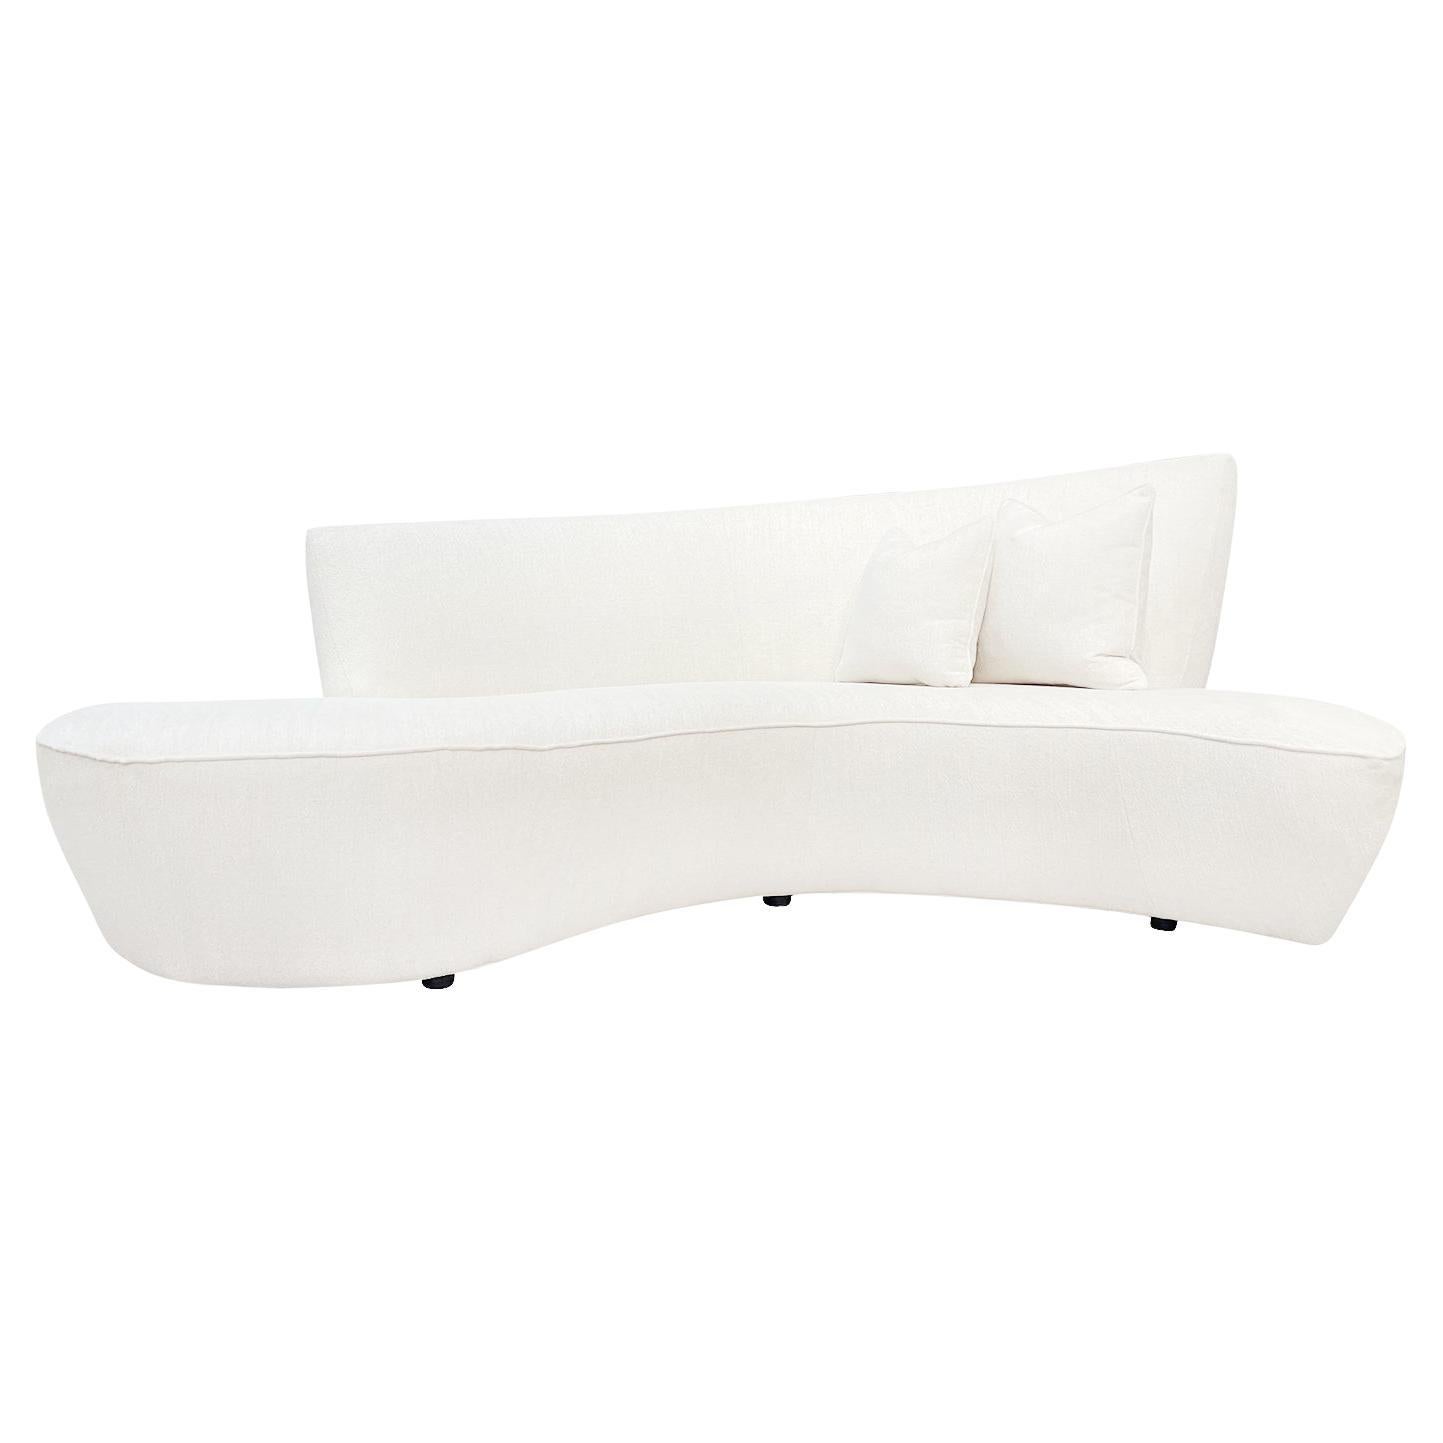 20th Century American Weiman Bilbao Four Seater Sofa, Canapé by Vladimir Kagan For Sale